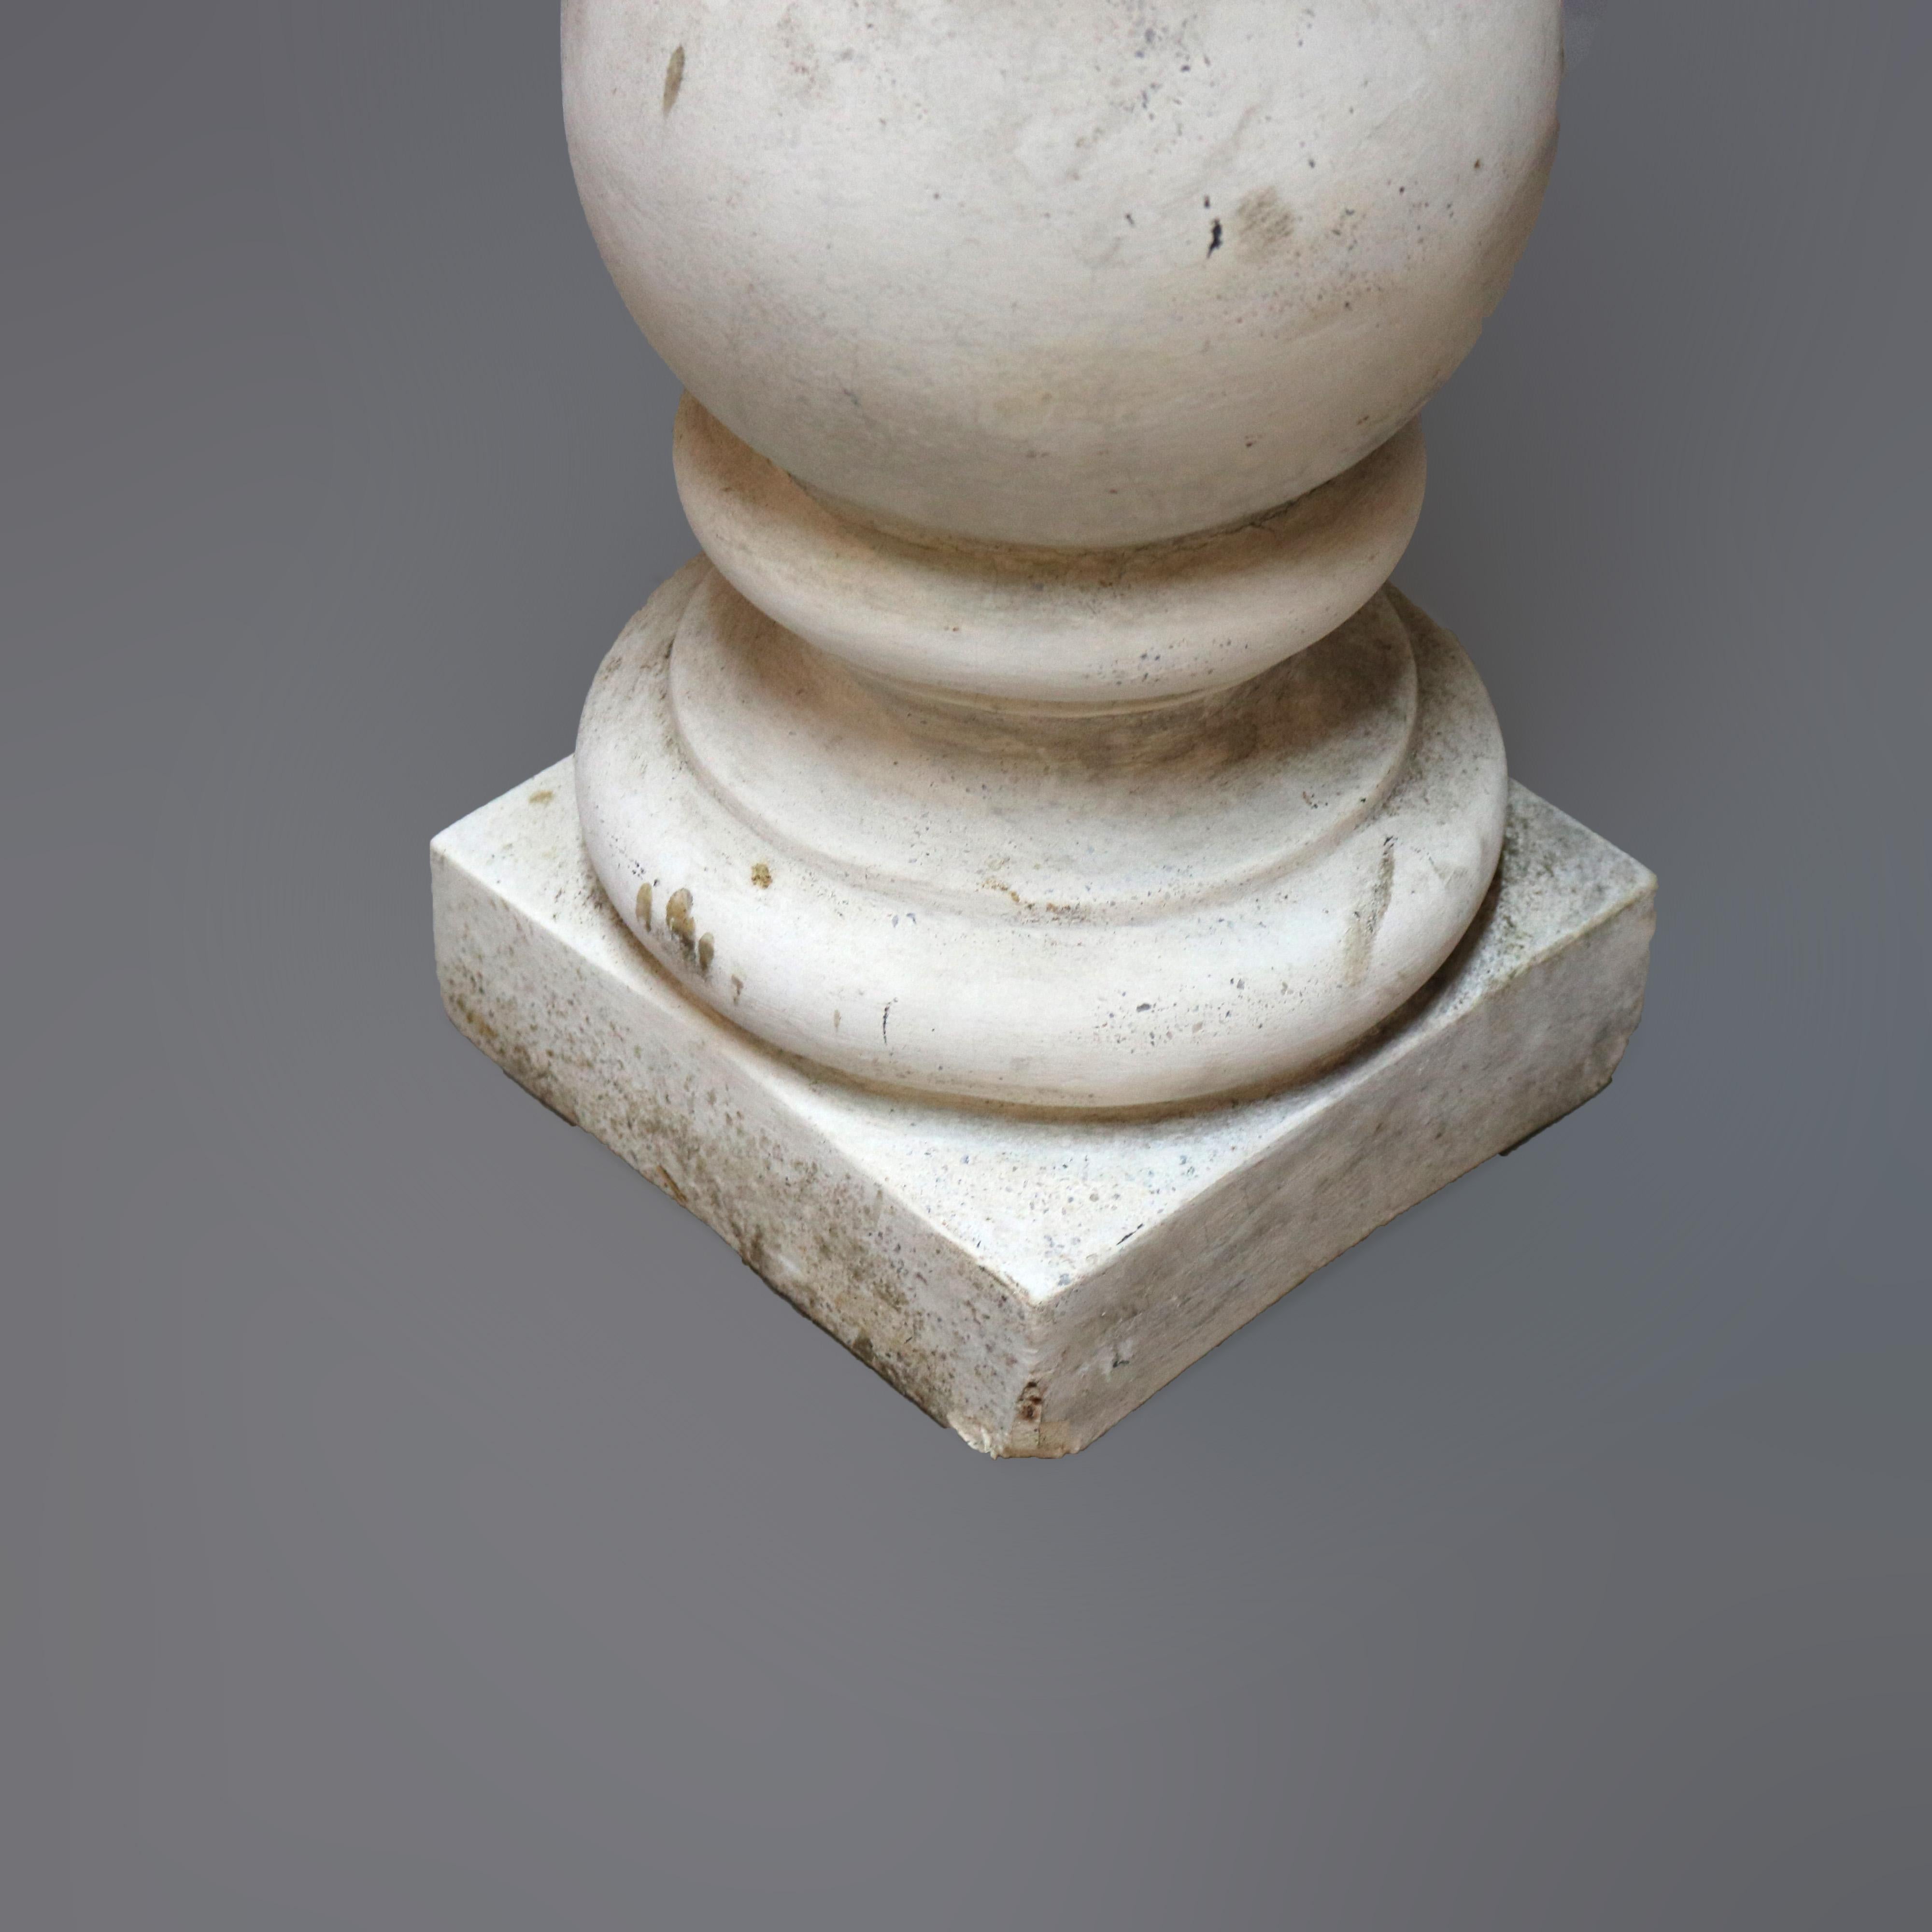 Classical Cast Hard Stone Balustrade Sculpture or Plant Display Pedestal 20th C For Sale 5